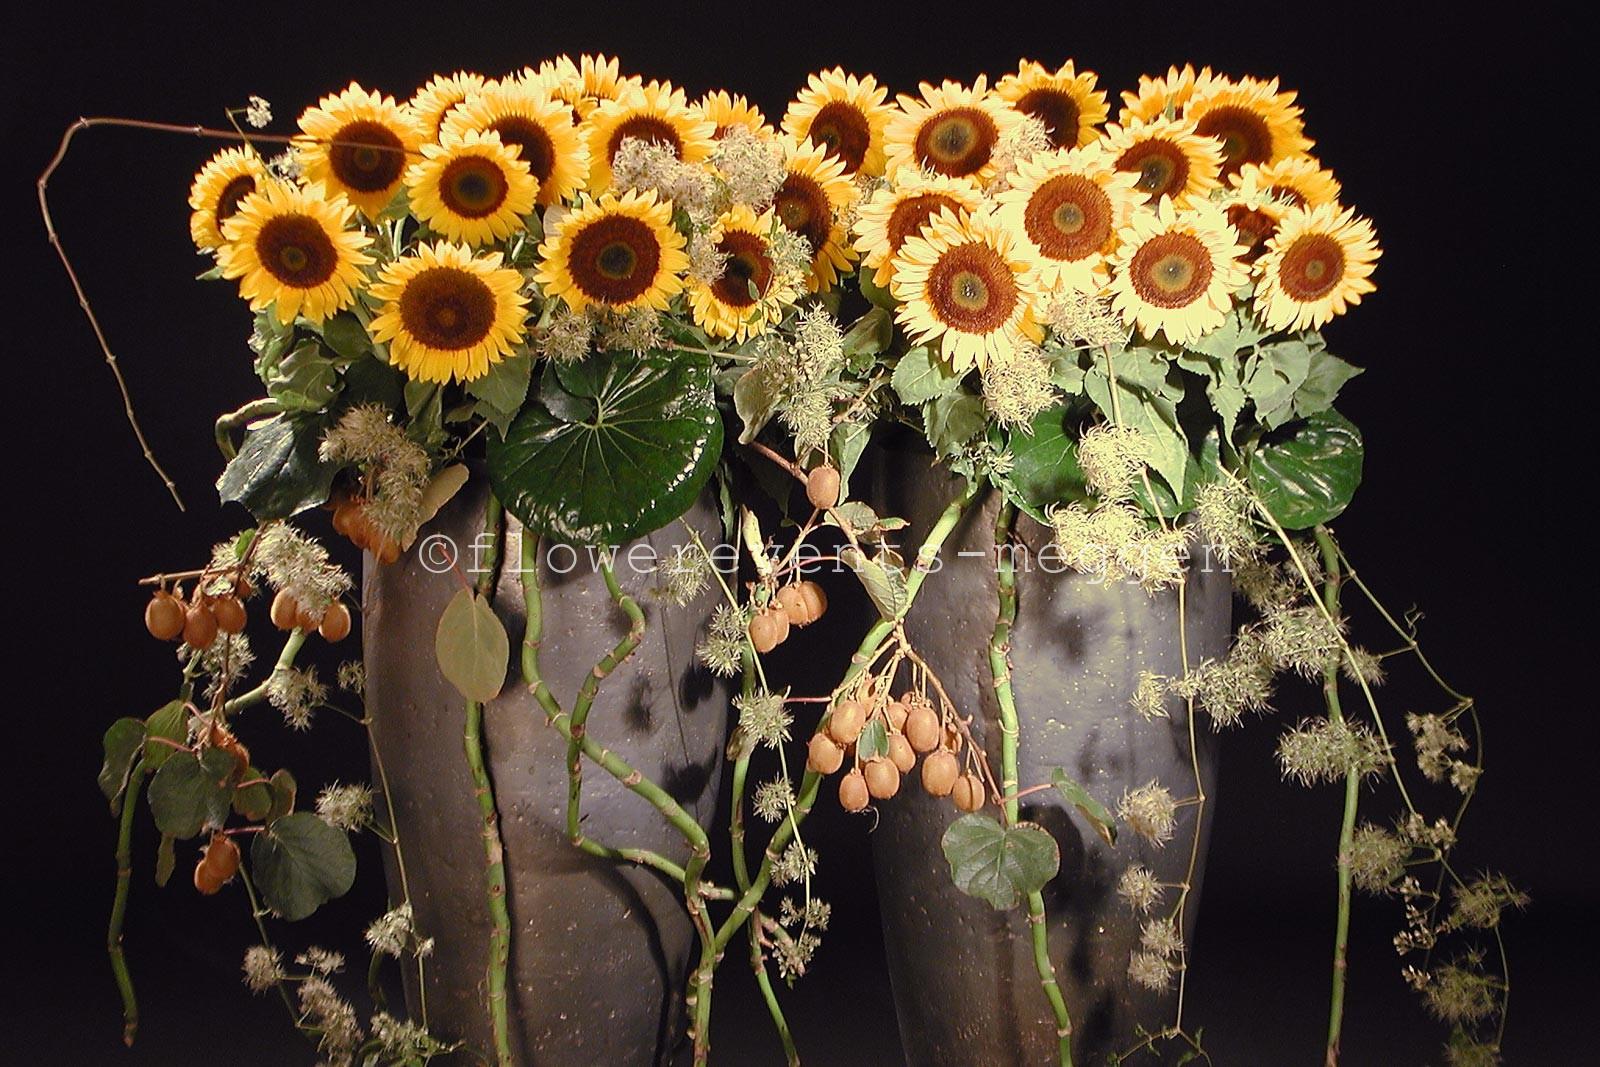 Installation wit sunflowers in Mobach ceramic vases